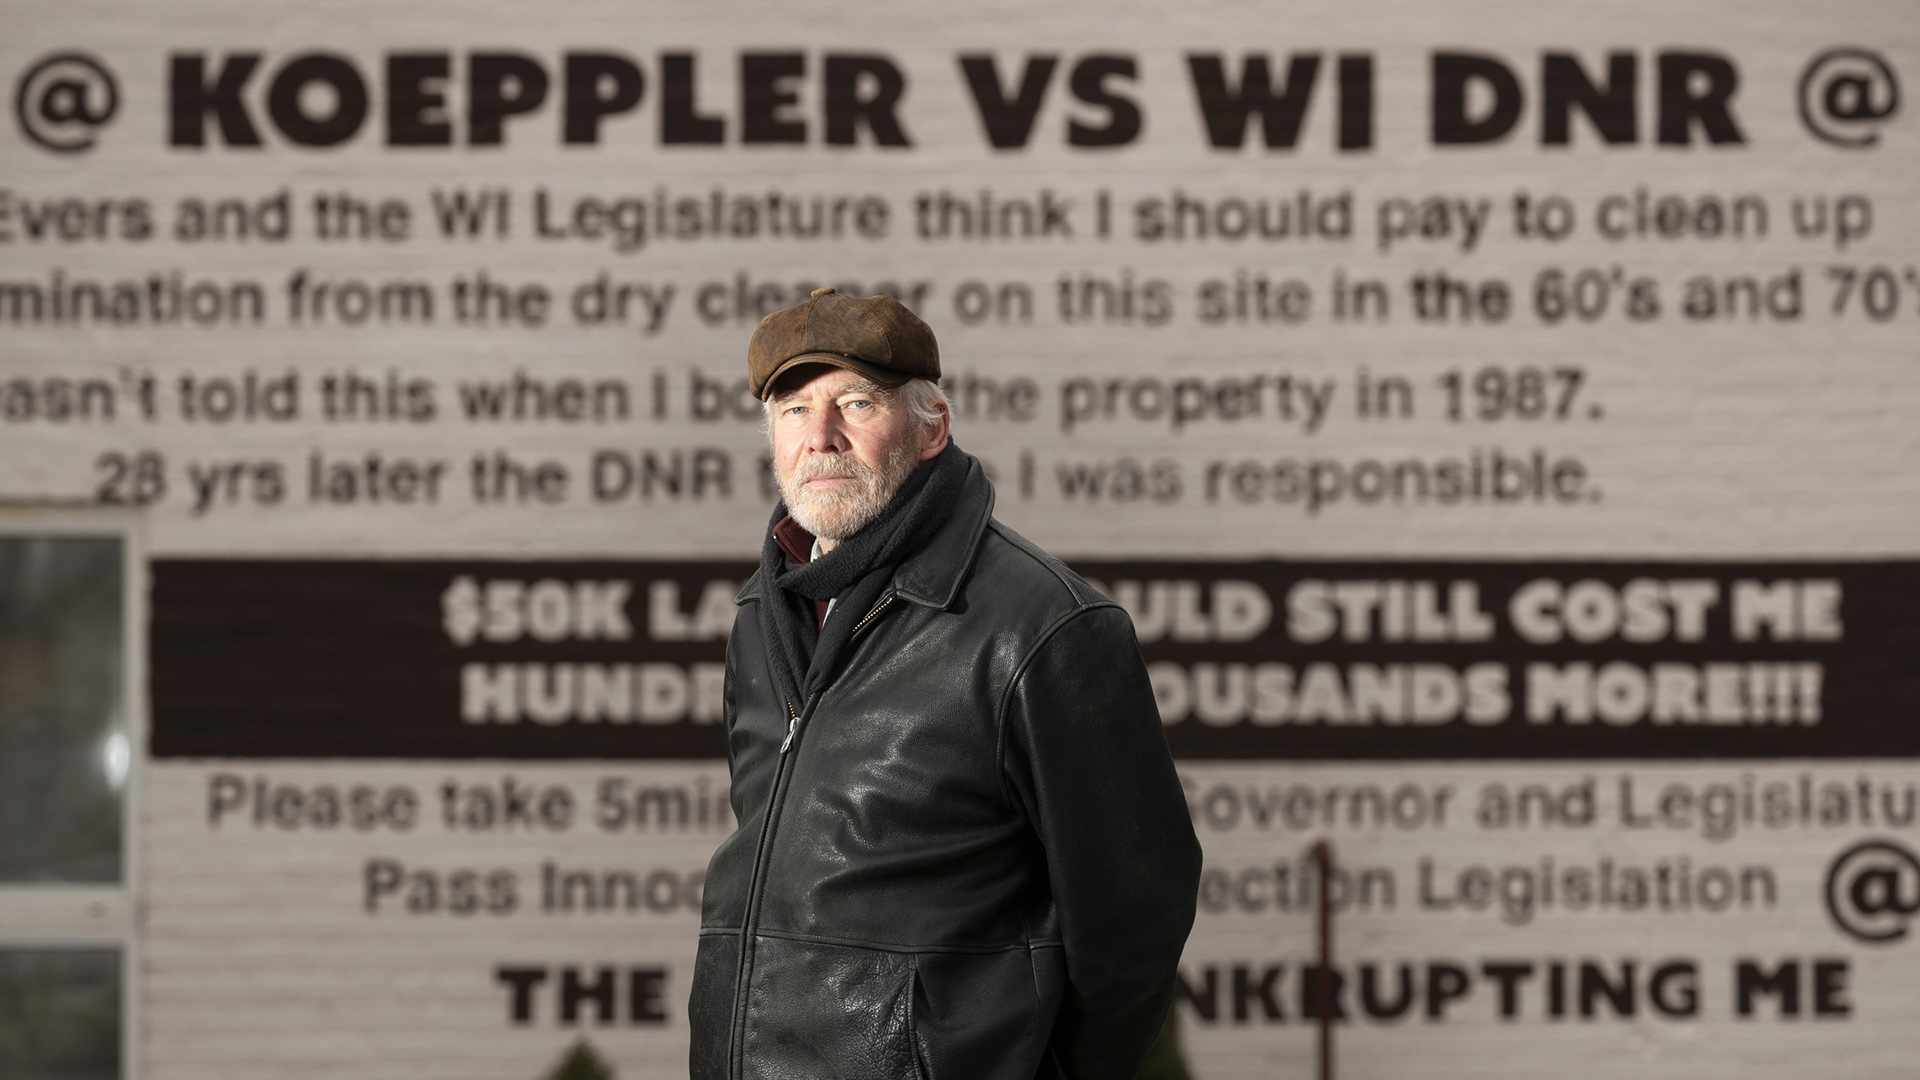 KenKoeepler stands in front of a building painted with messages criticizing the Wisconsin Department of Natural Resources for its actions with regards to the property.